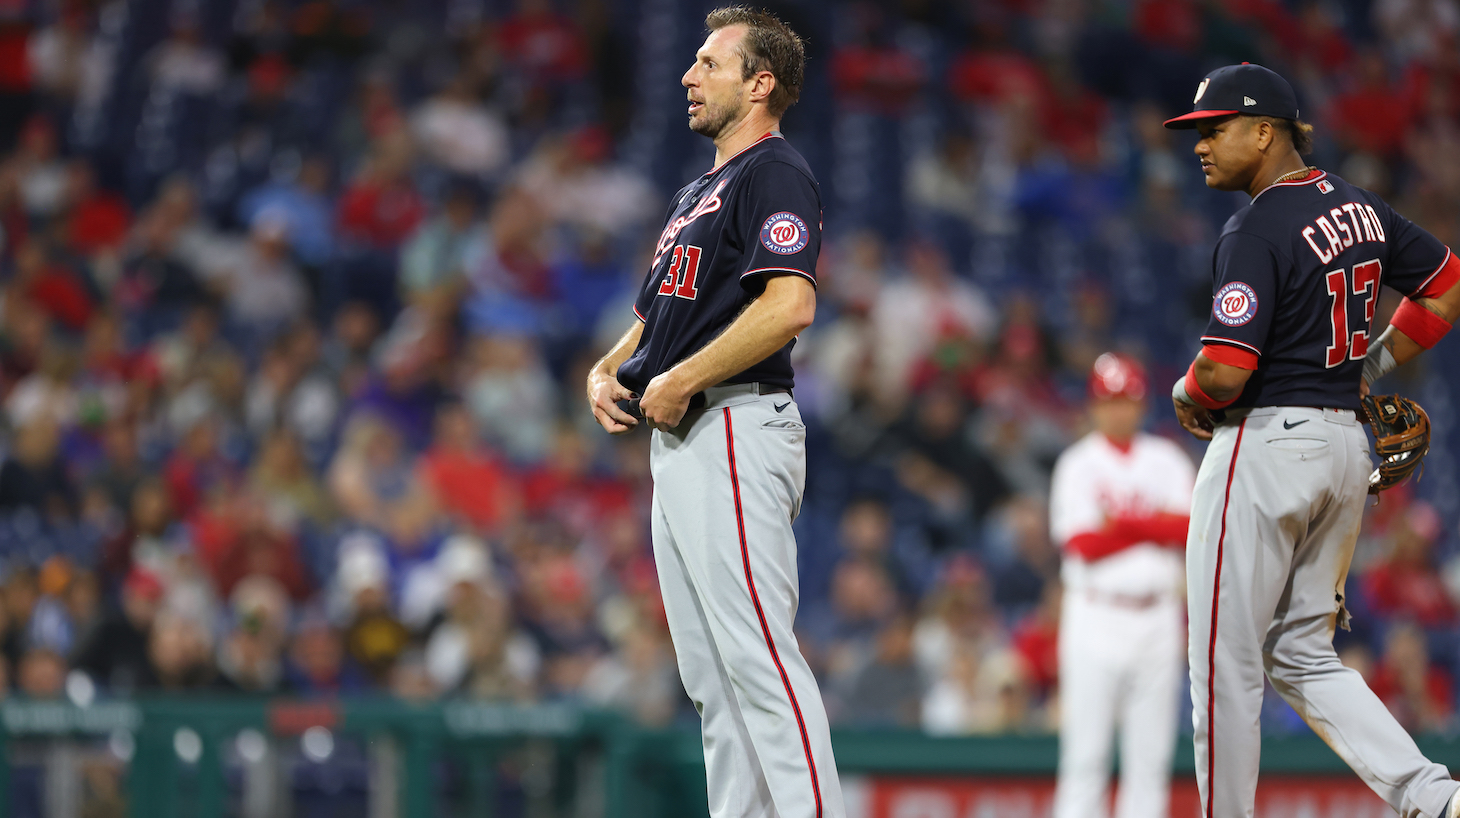 PHILADELPHIA, PA - JUNE 22: Pitcher Max Scherzer #31 of the Washington Nationals takes off his belt after throwing his cap and glove down as umpires ask to search him for sticky substances during the fourth inning of a game against the Philadelphia Phillies at Citizens Bank Park on June 22, 2021 in Philadelphia, Pennsylvania. (Photo by Rich Schultz/Getty Images)